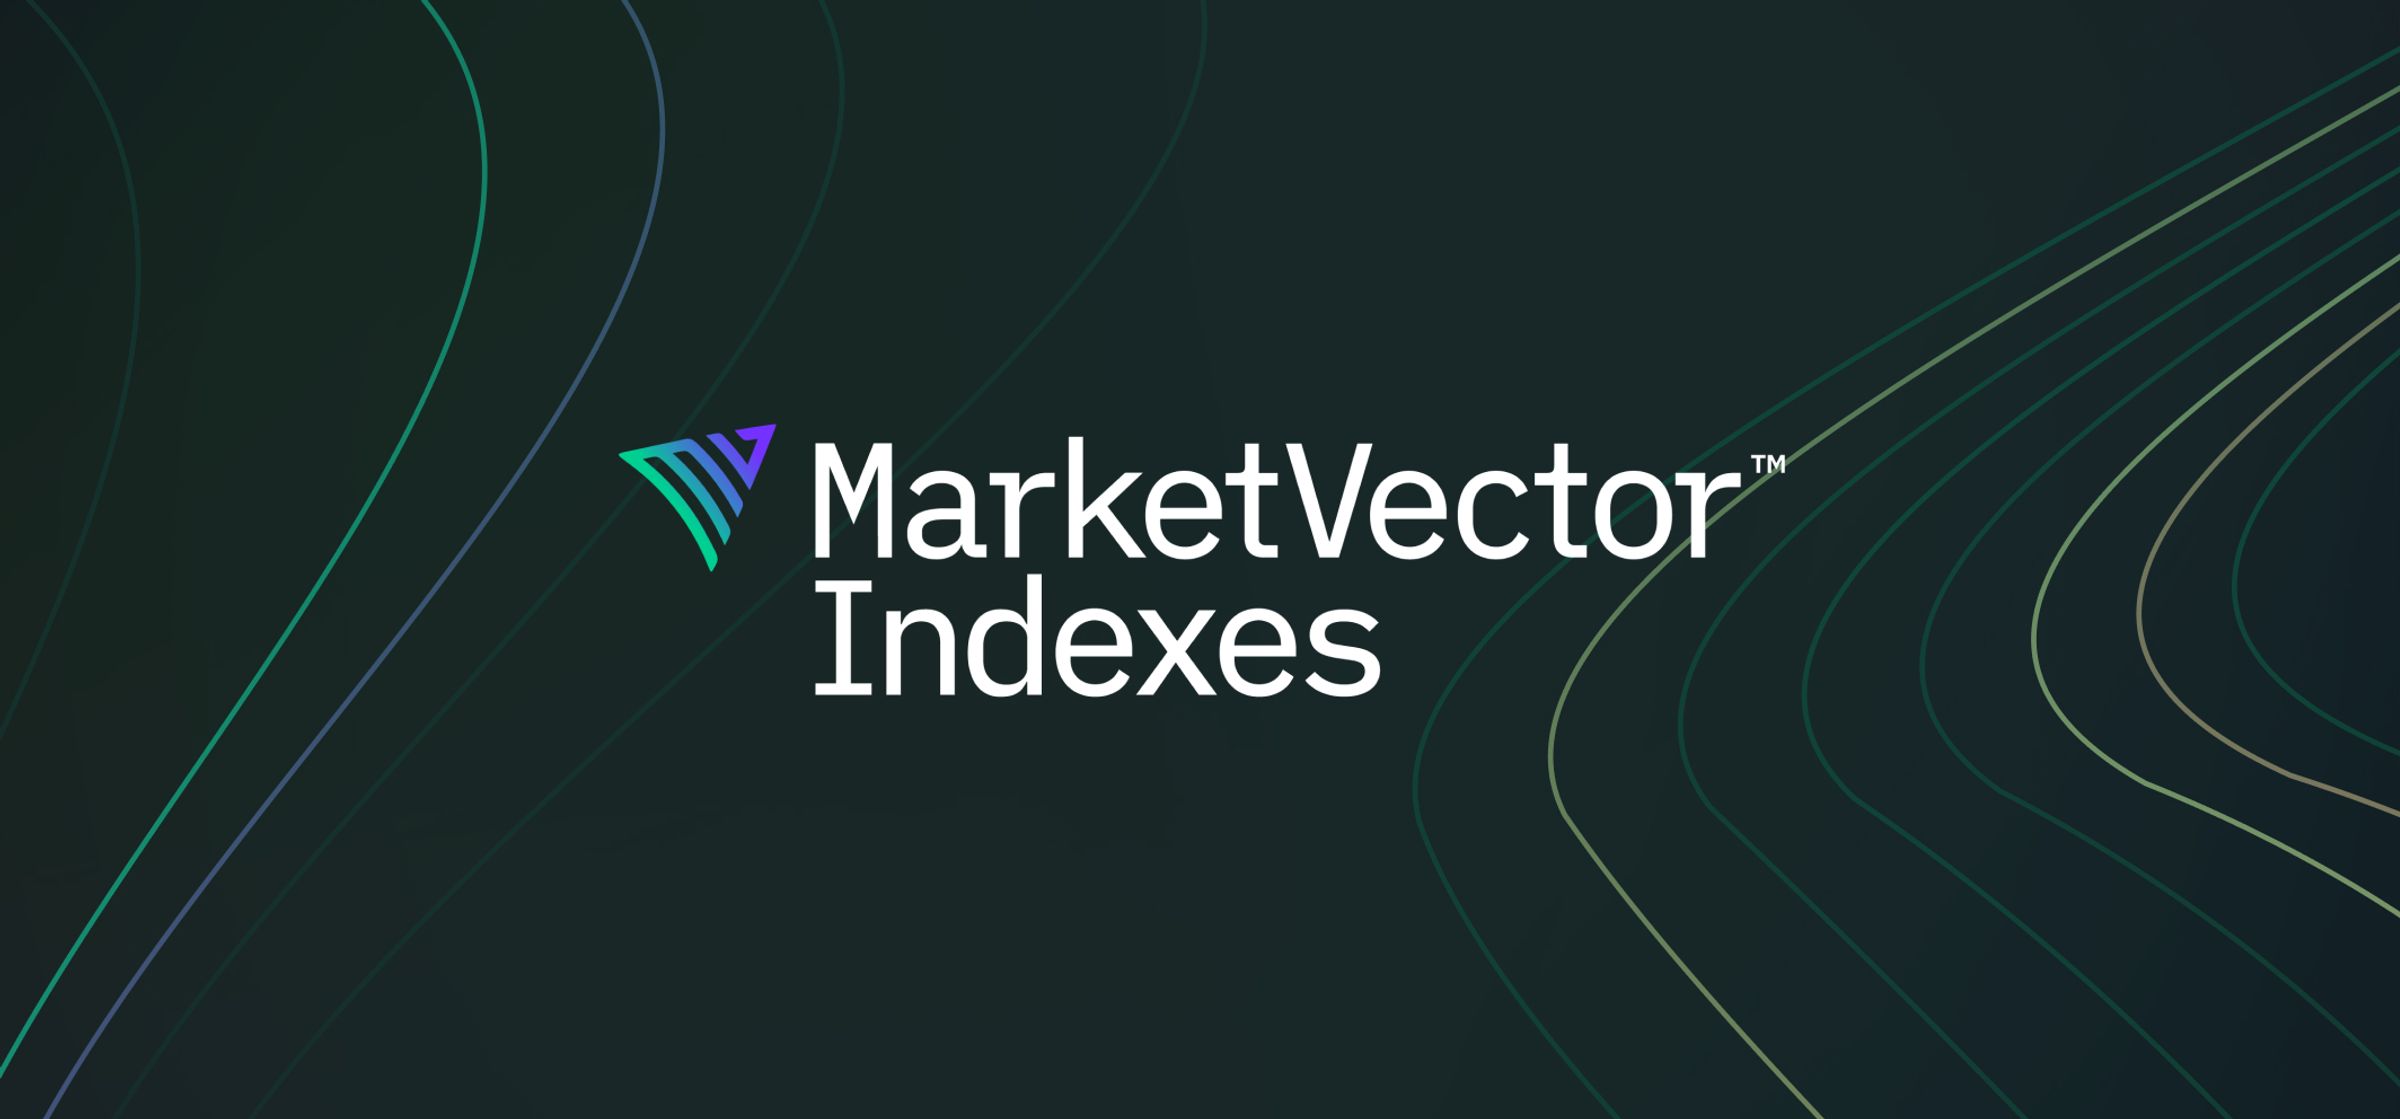 MarketVector Indexes™ and Token Terminal to Provide Exclusive Web3 Data, Product Offerings